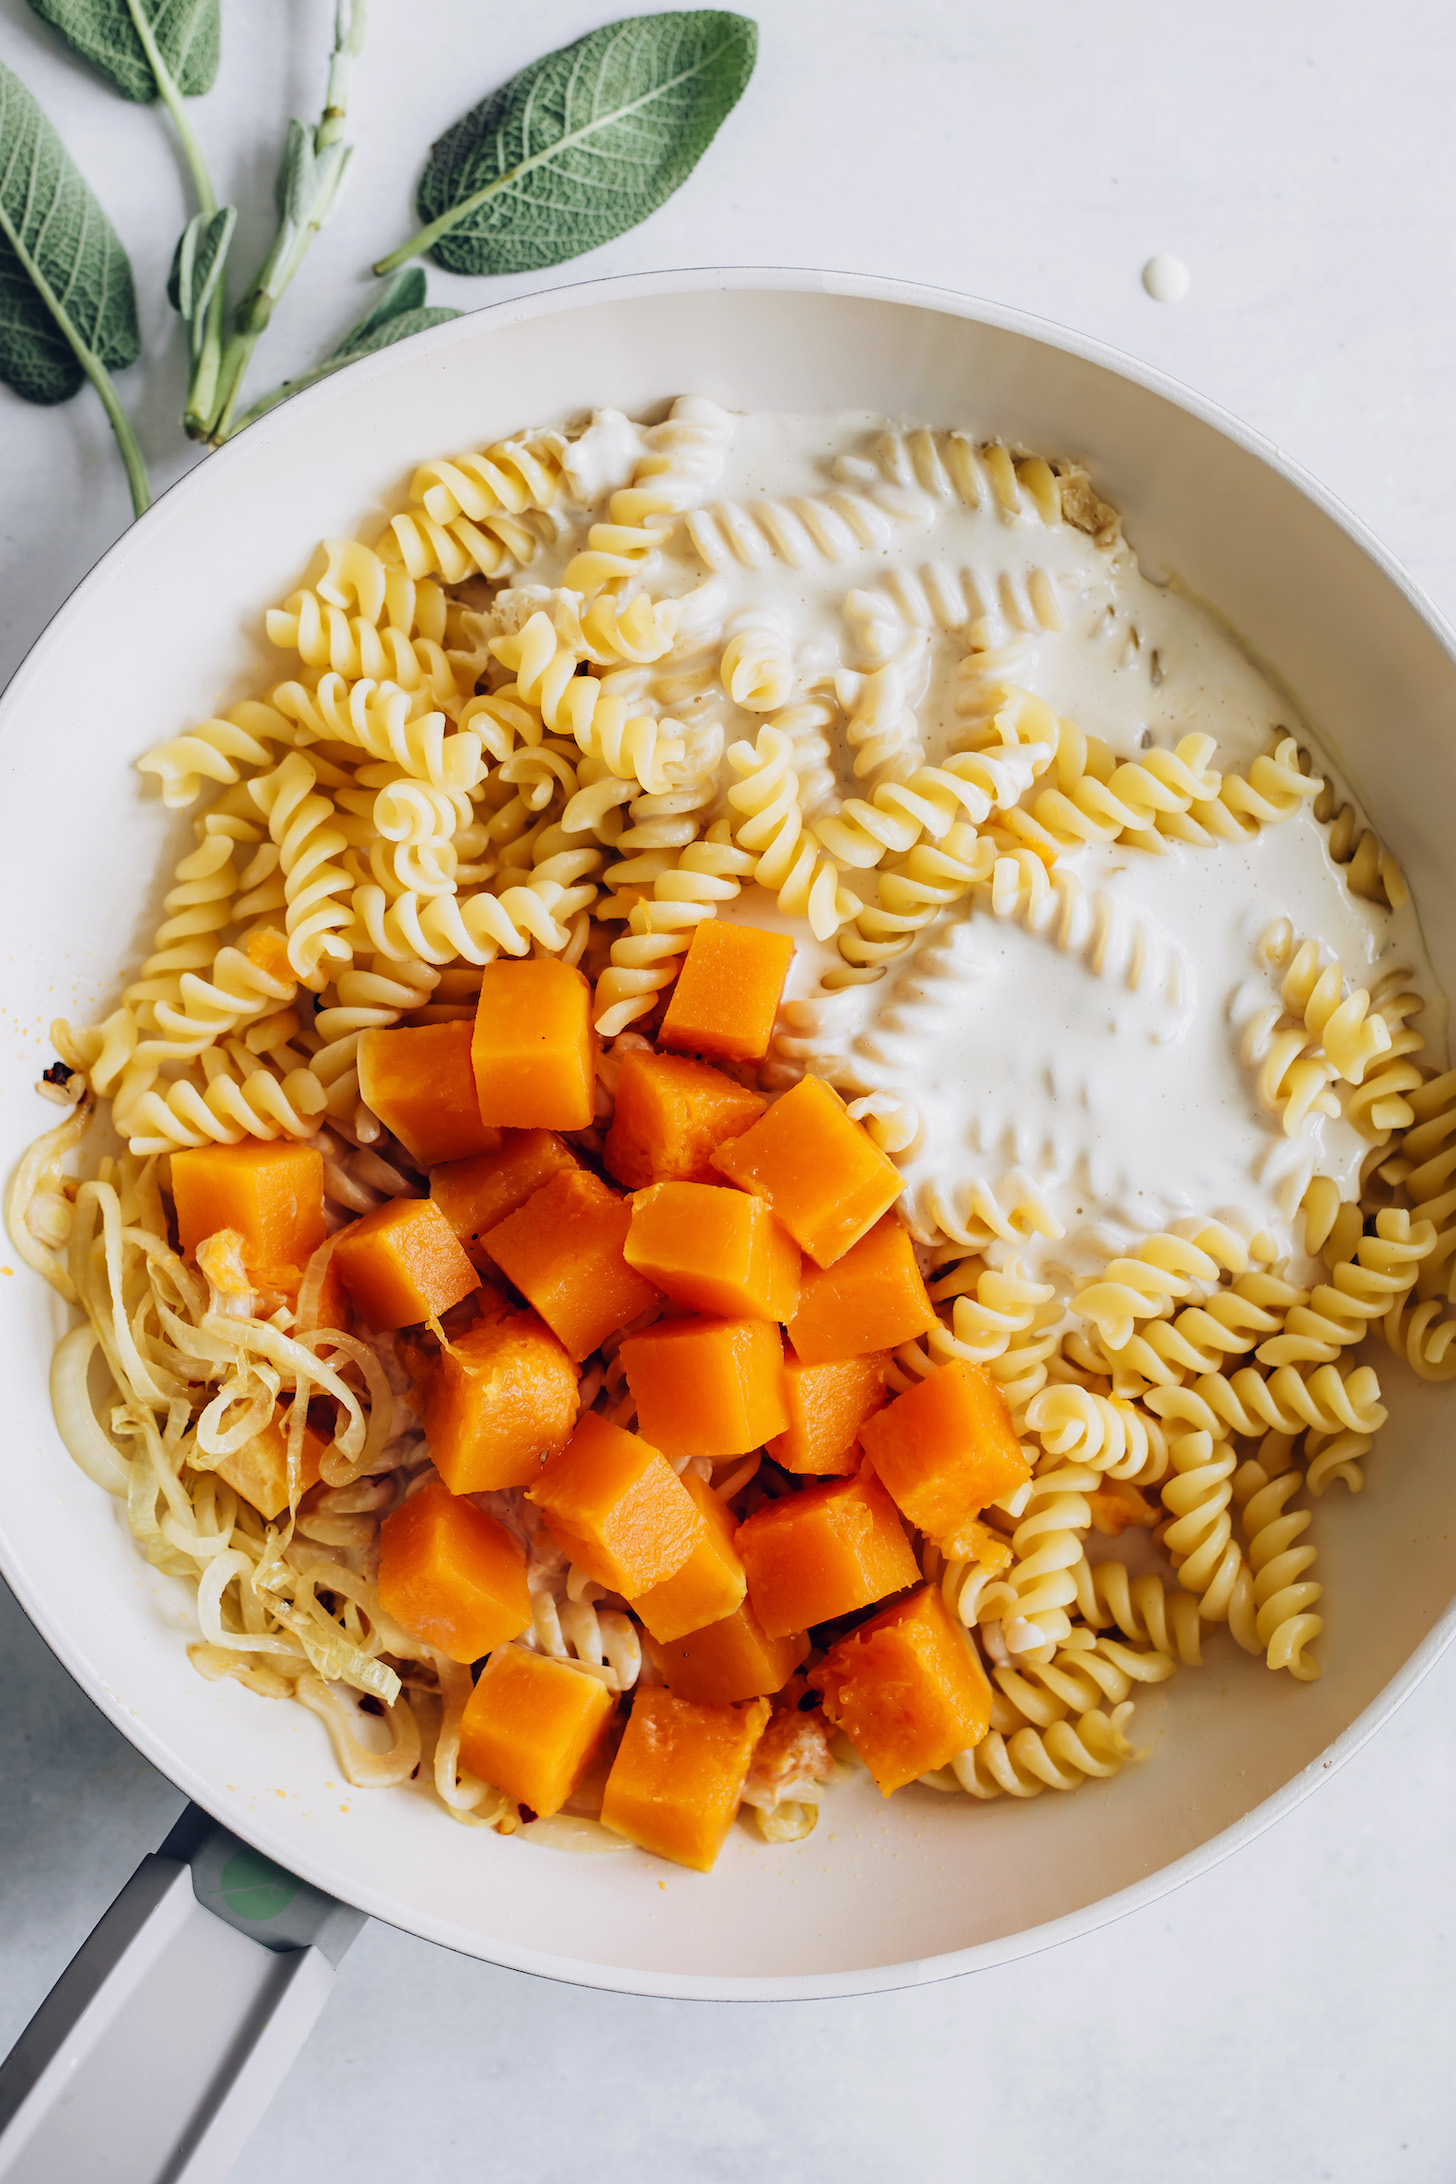 Skillet of cooked pasta, caramelized onion, butternut squash, and garlicky vegan alfredo